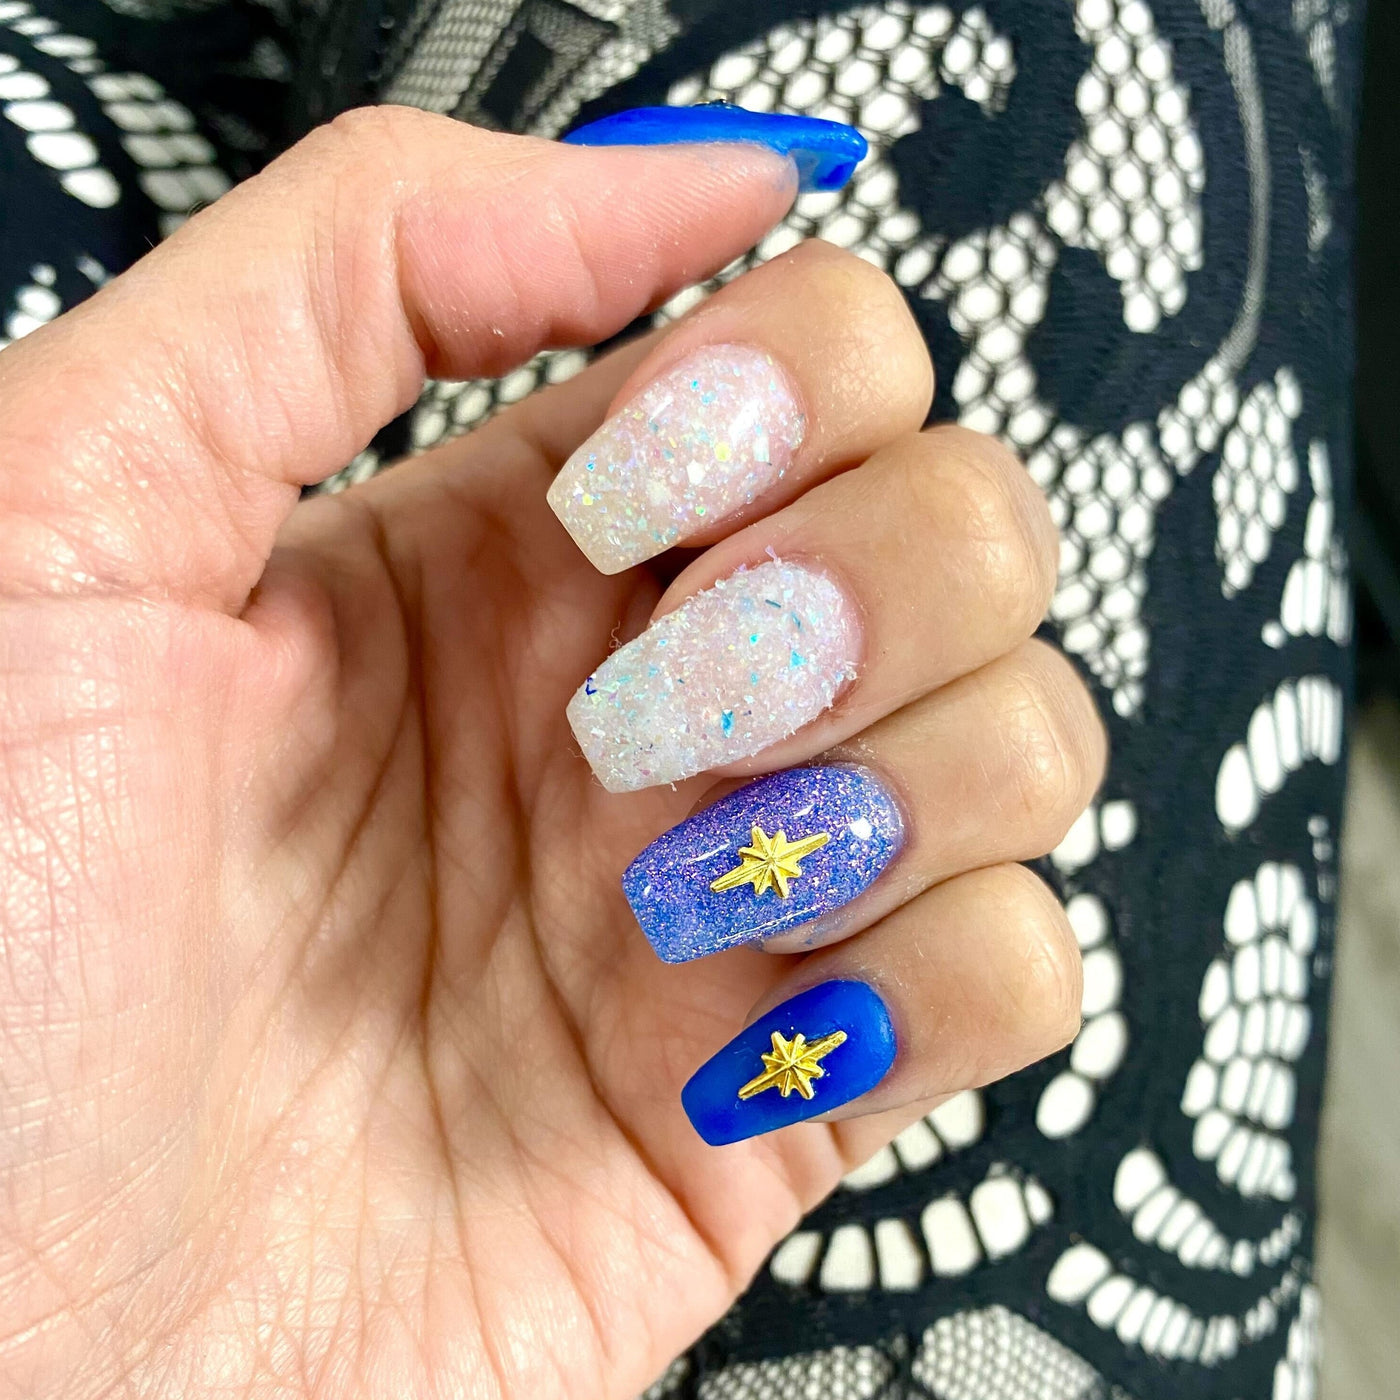 METAL STAR AND MOON CRYSTALS - Peppi Gel